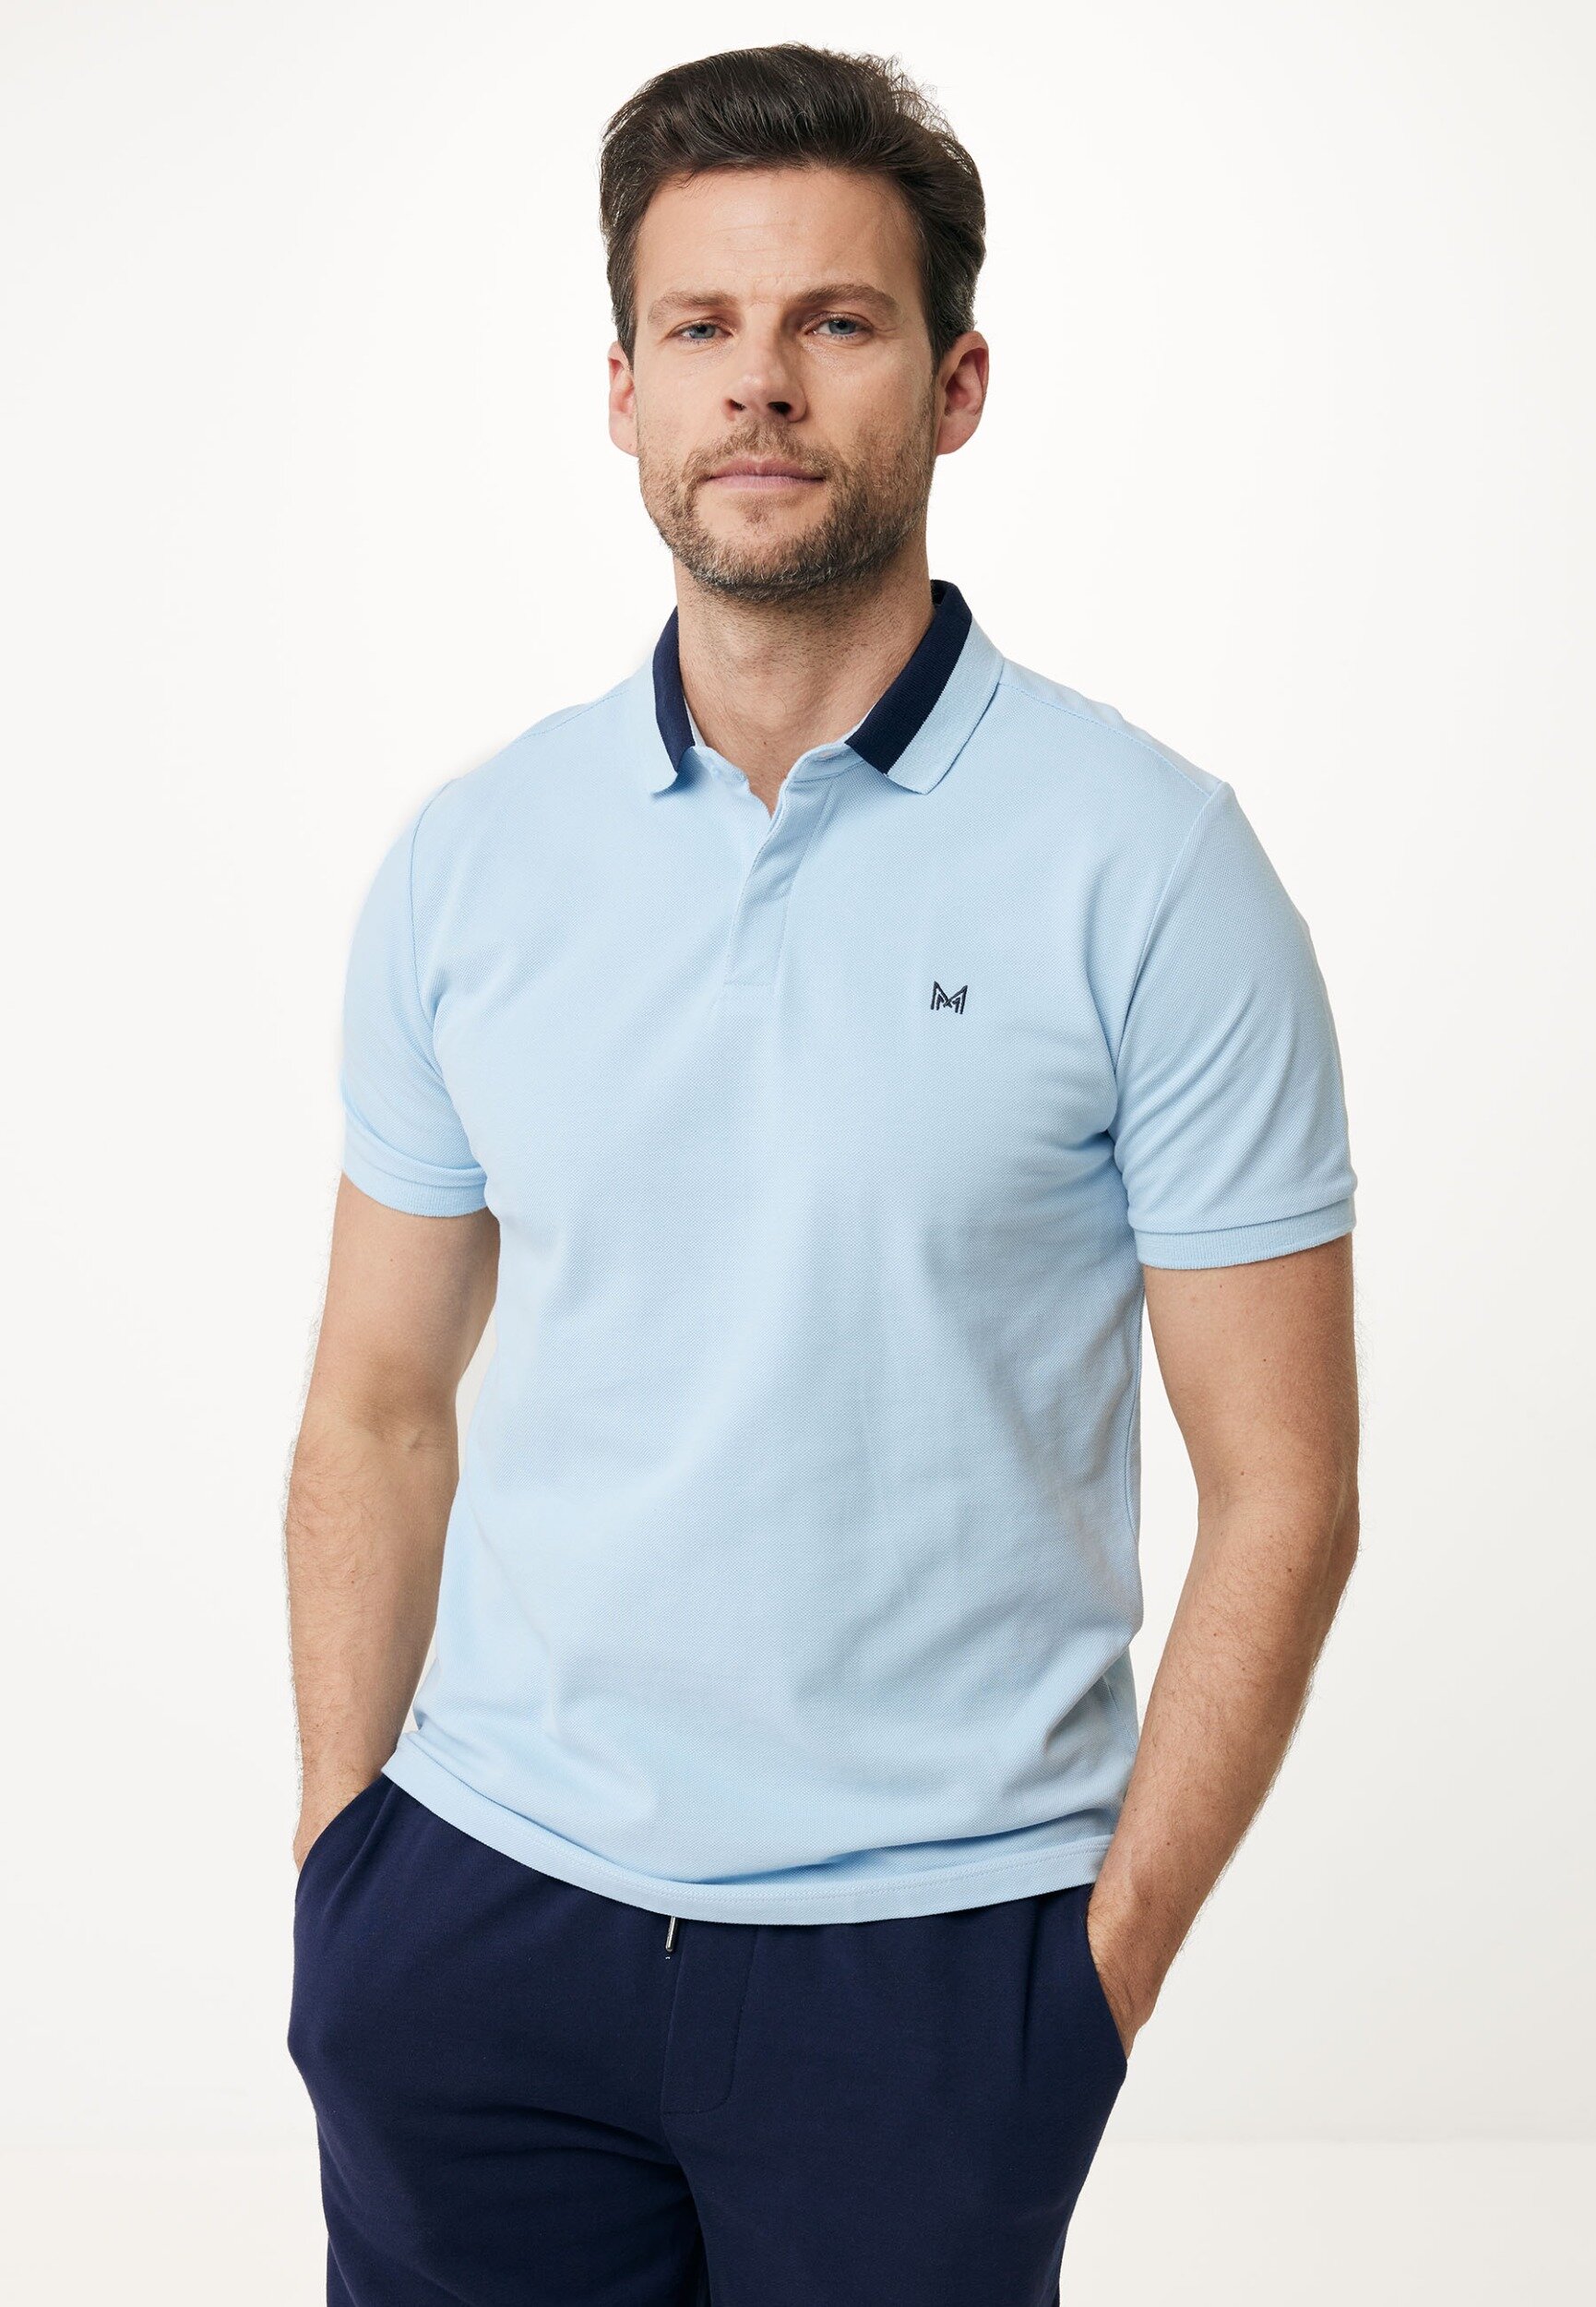 Mexx Short Sleeve Polo With Color Block Collar Mannen - Fresh Blauw - Maat L